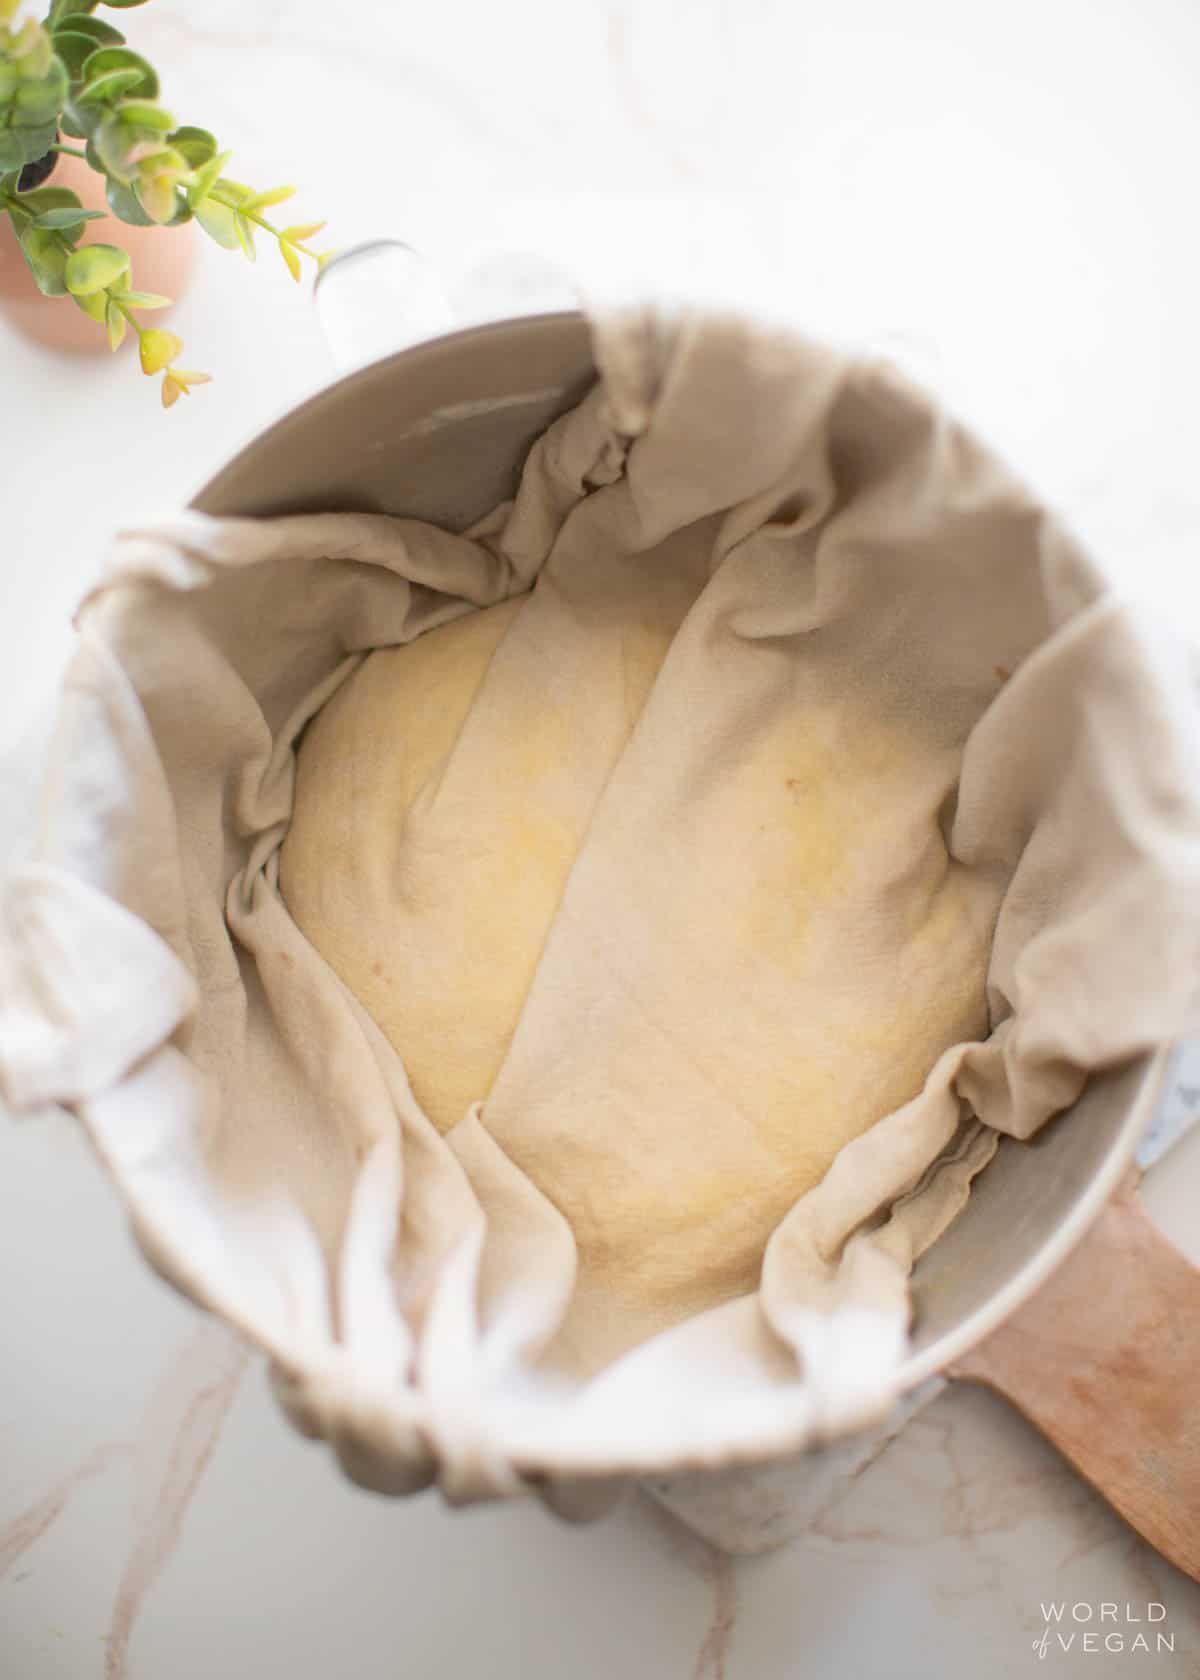 Vegan challah dough in a bowl, covered with a damp cloth while it rises.